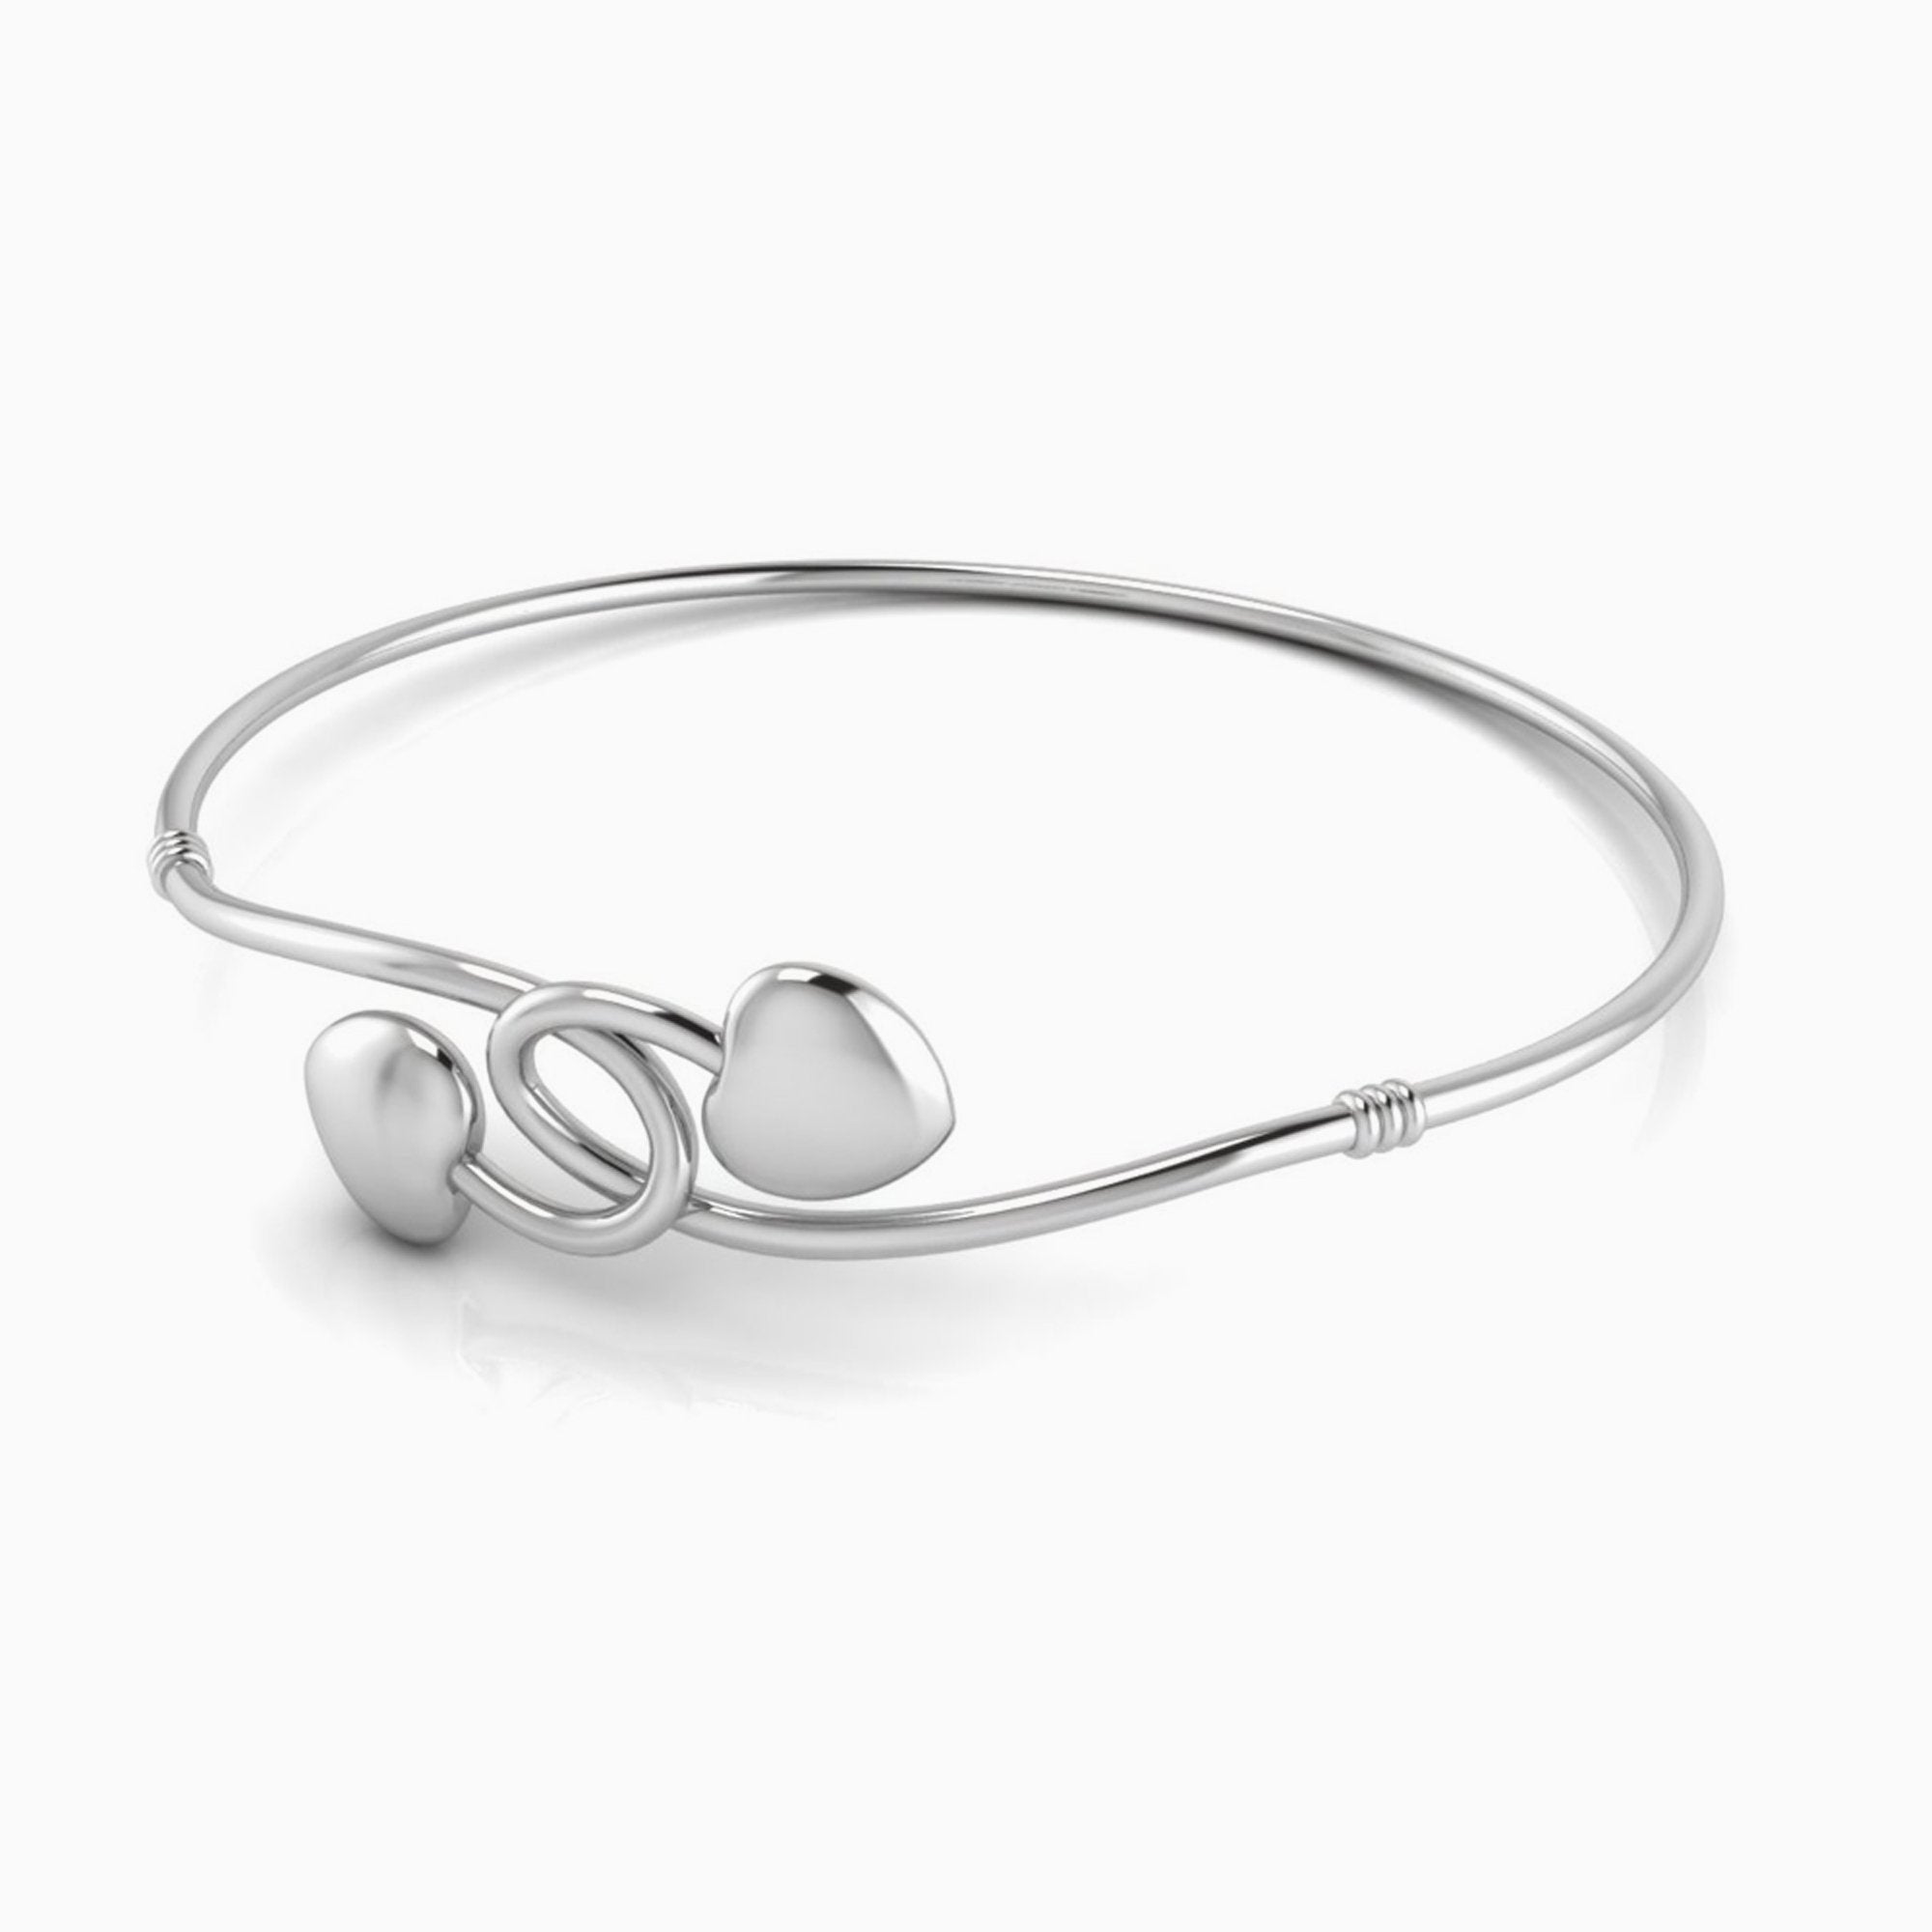 Baby Bangle Personalised Gifts for Christmas, Christenings, Baby Shower,  925 Sterling Silver Engraved ID Keepsake , Babies First Birthday - Etsy